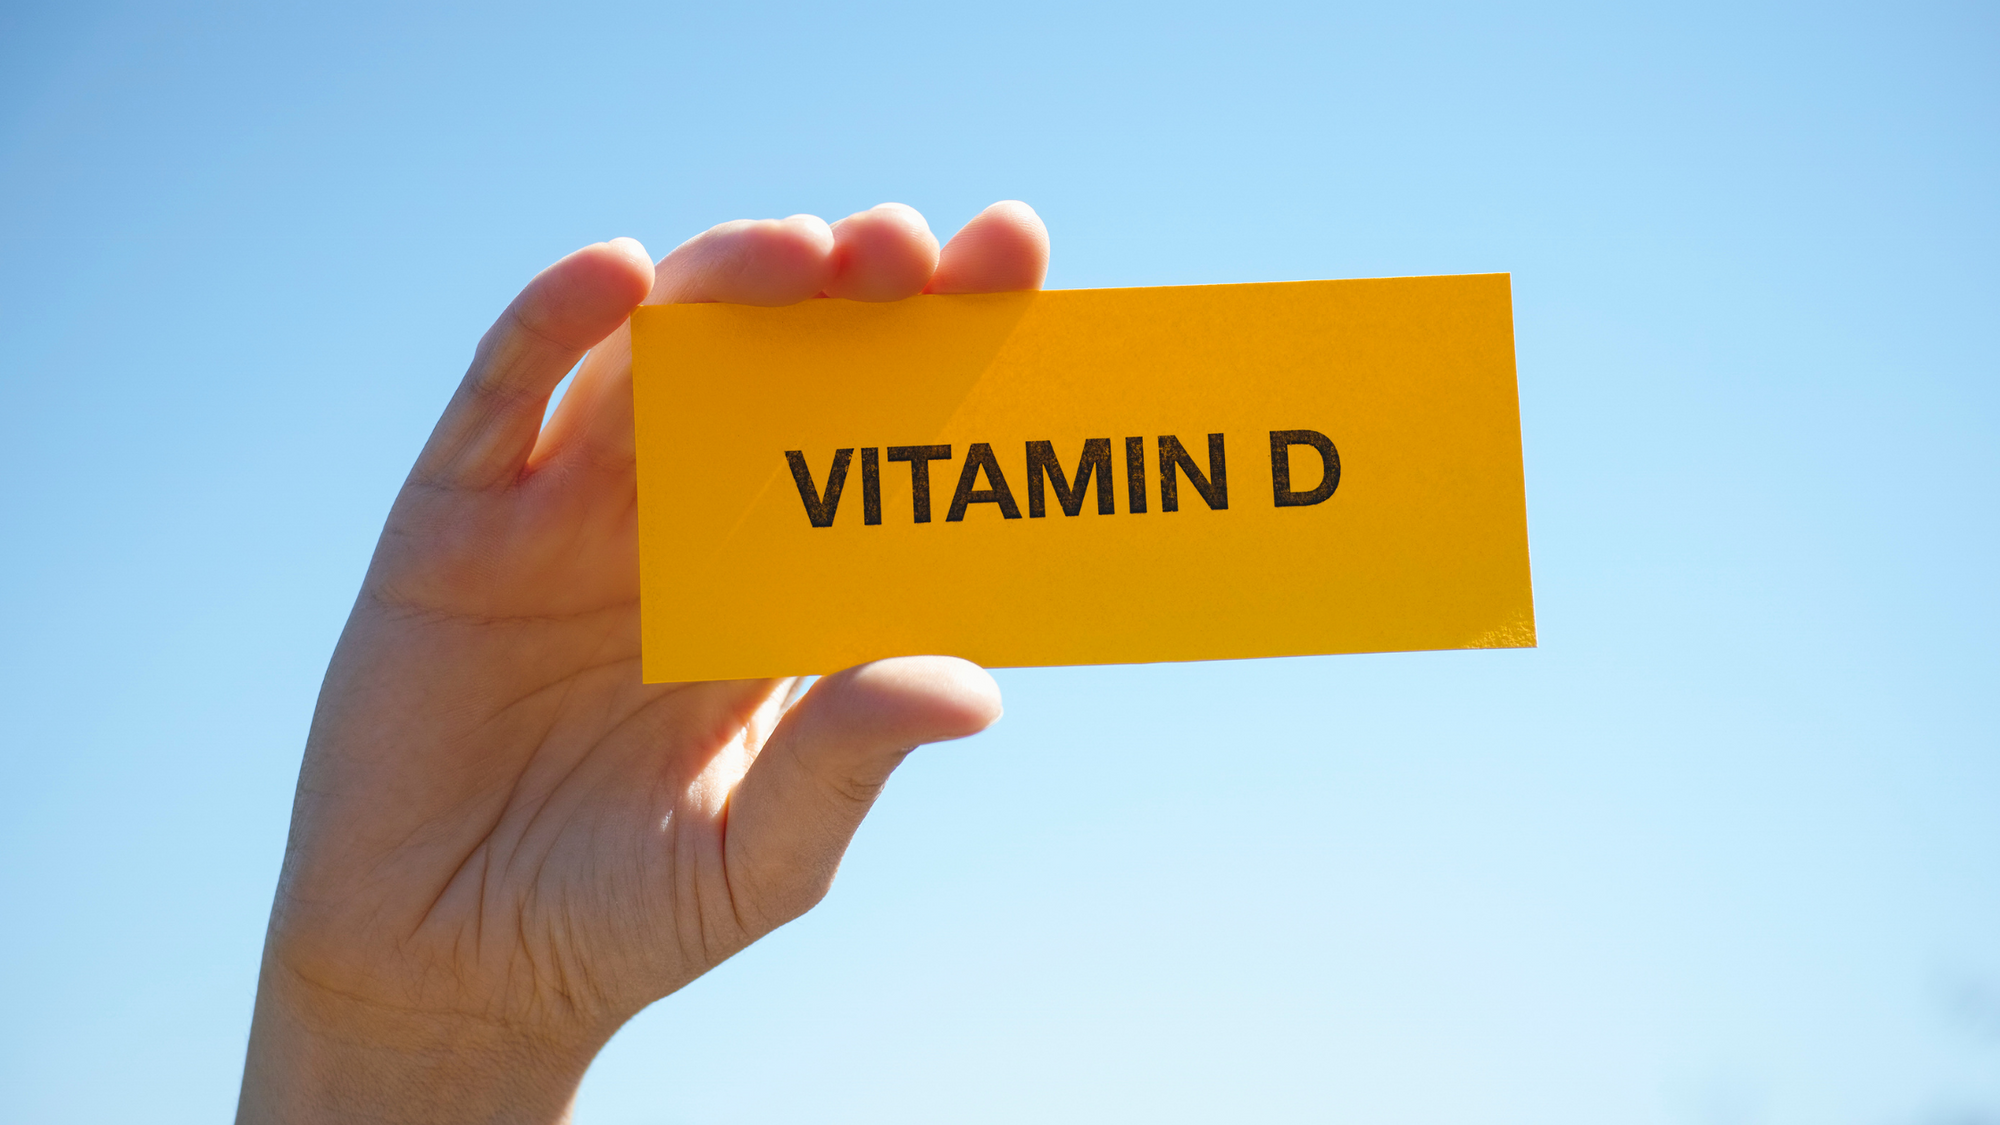 About Vitamin D